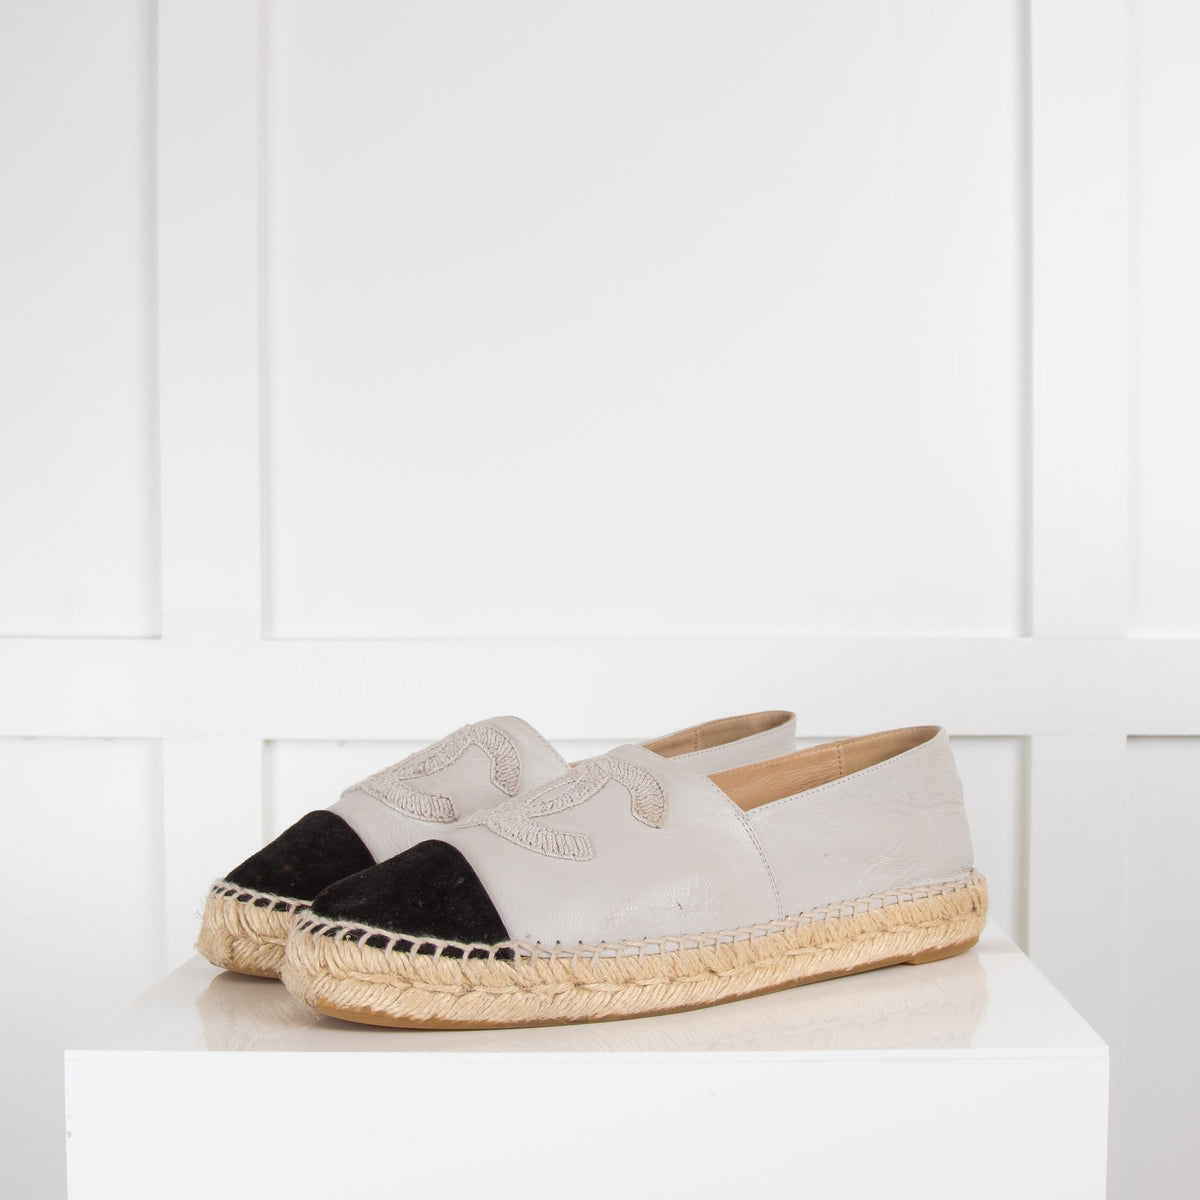 Chanel Grey Espadrilles with Black Toe Chanel A Wide Selection of High  Quality Products at Low Prices